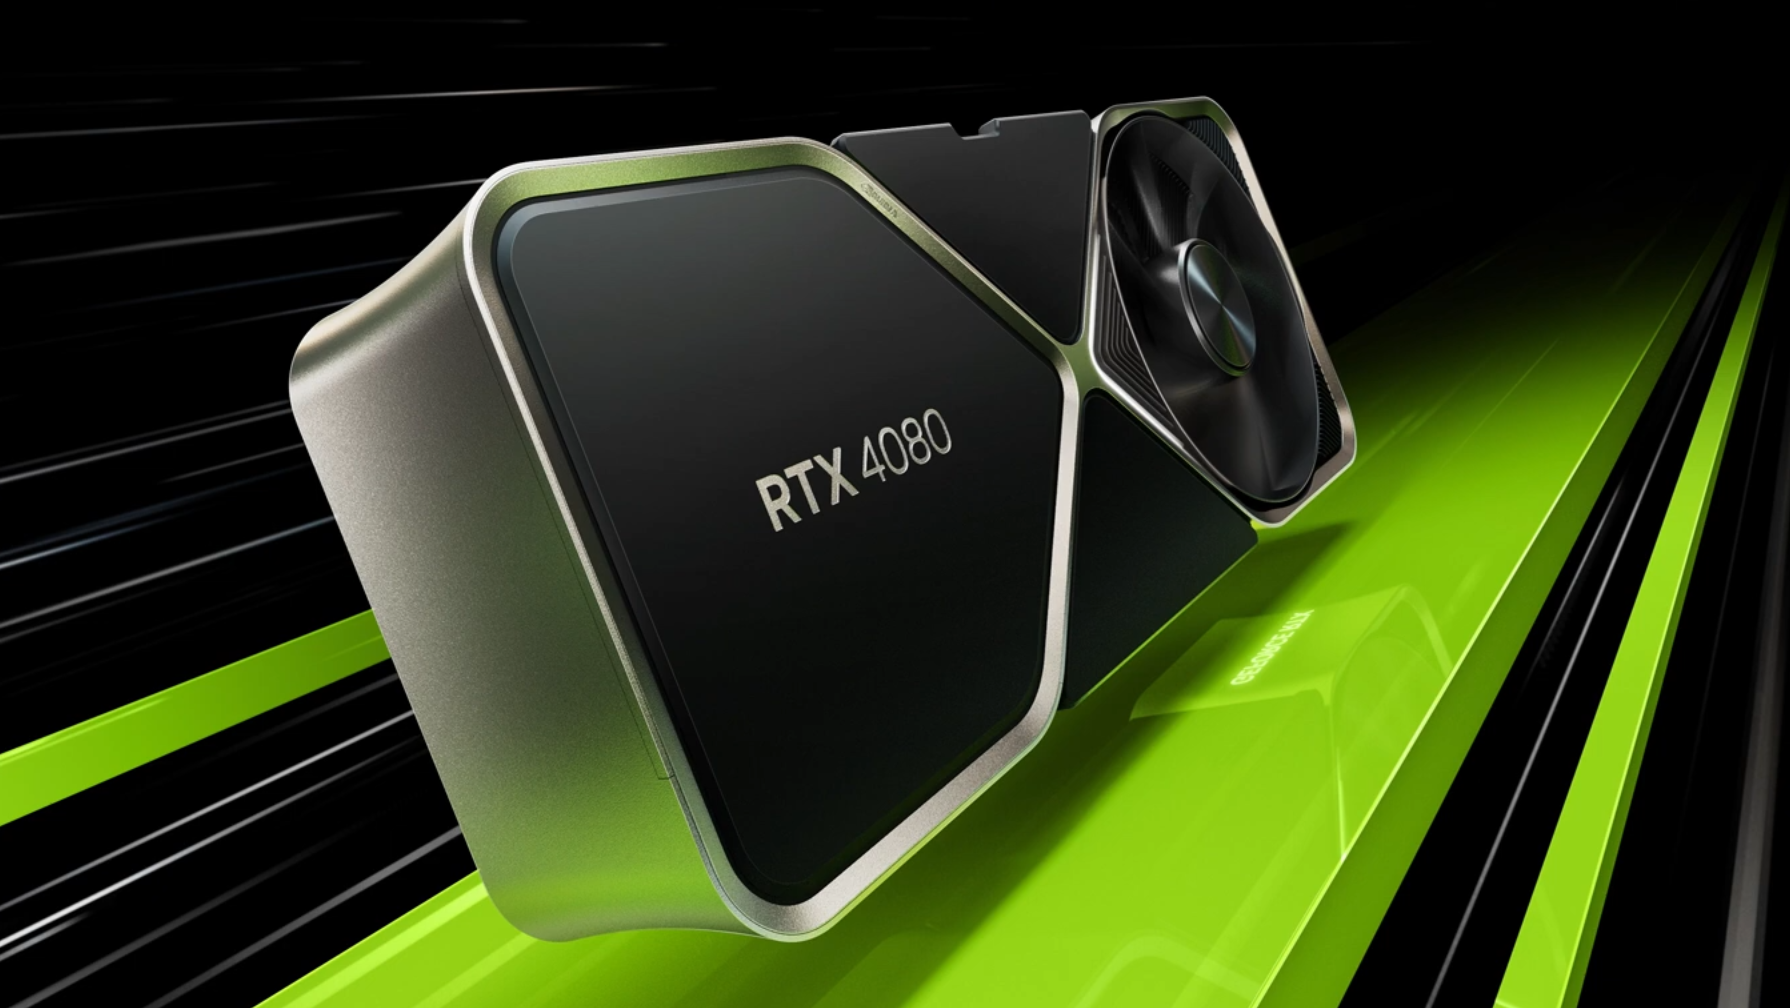 A render of the Nvidia GeForce RTX 4080 graphics card, with its Founders Edition design.